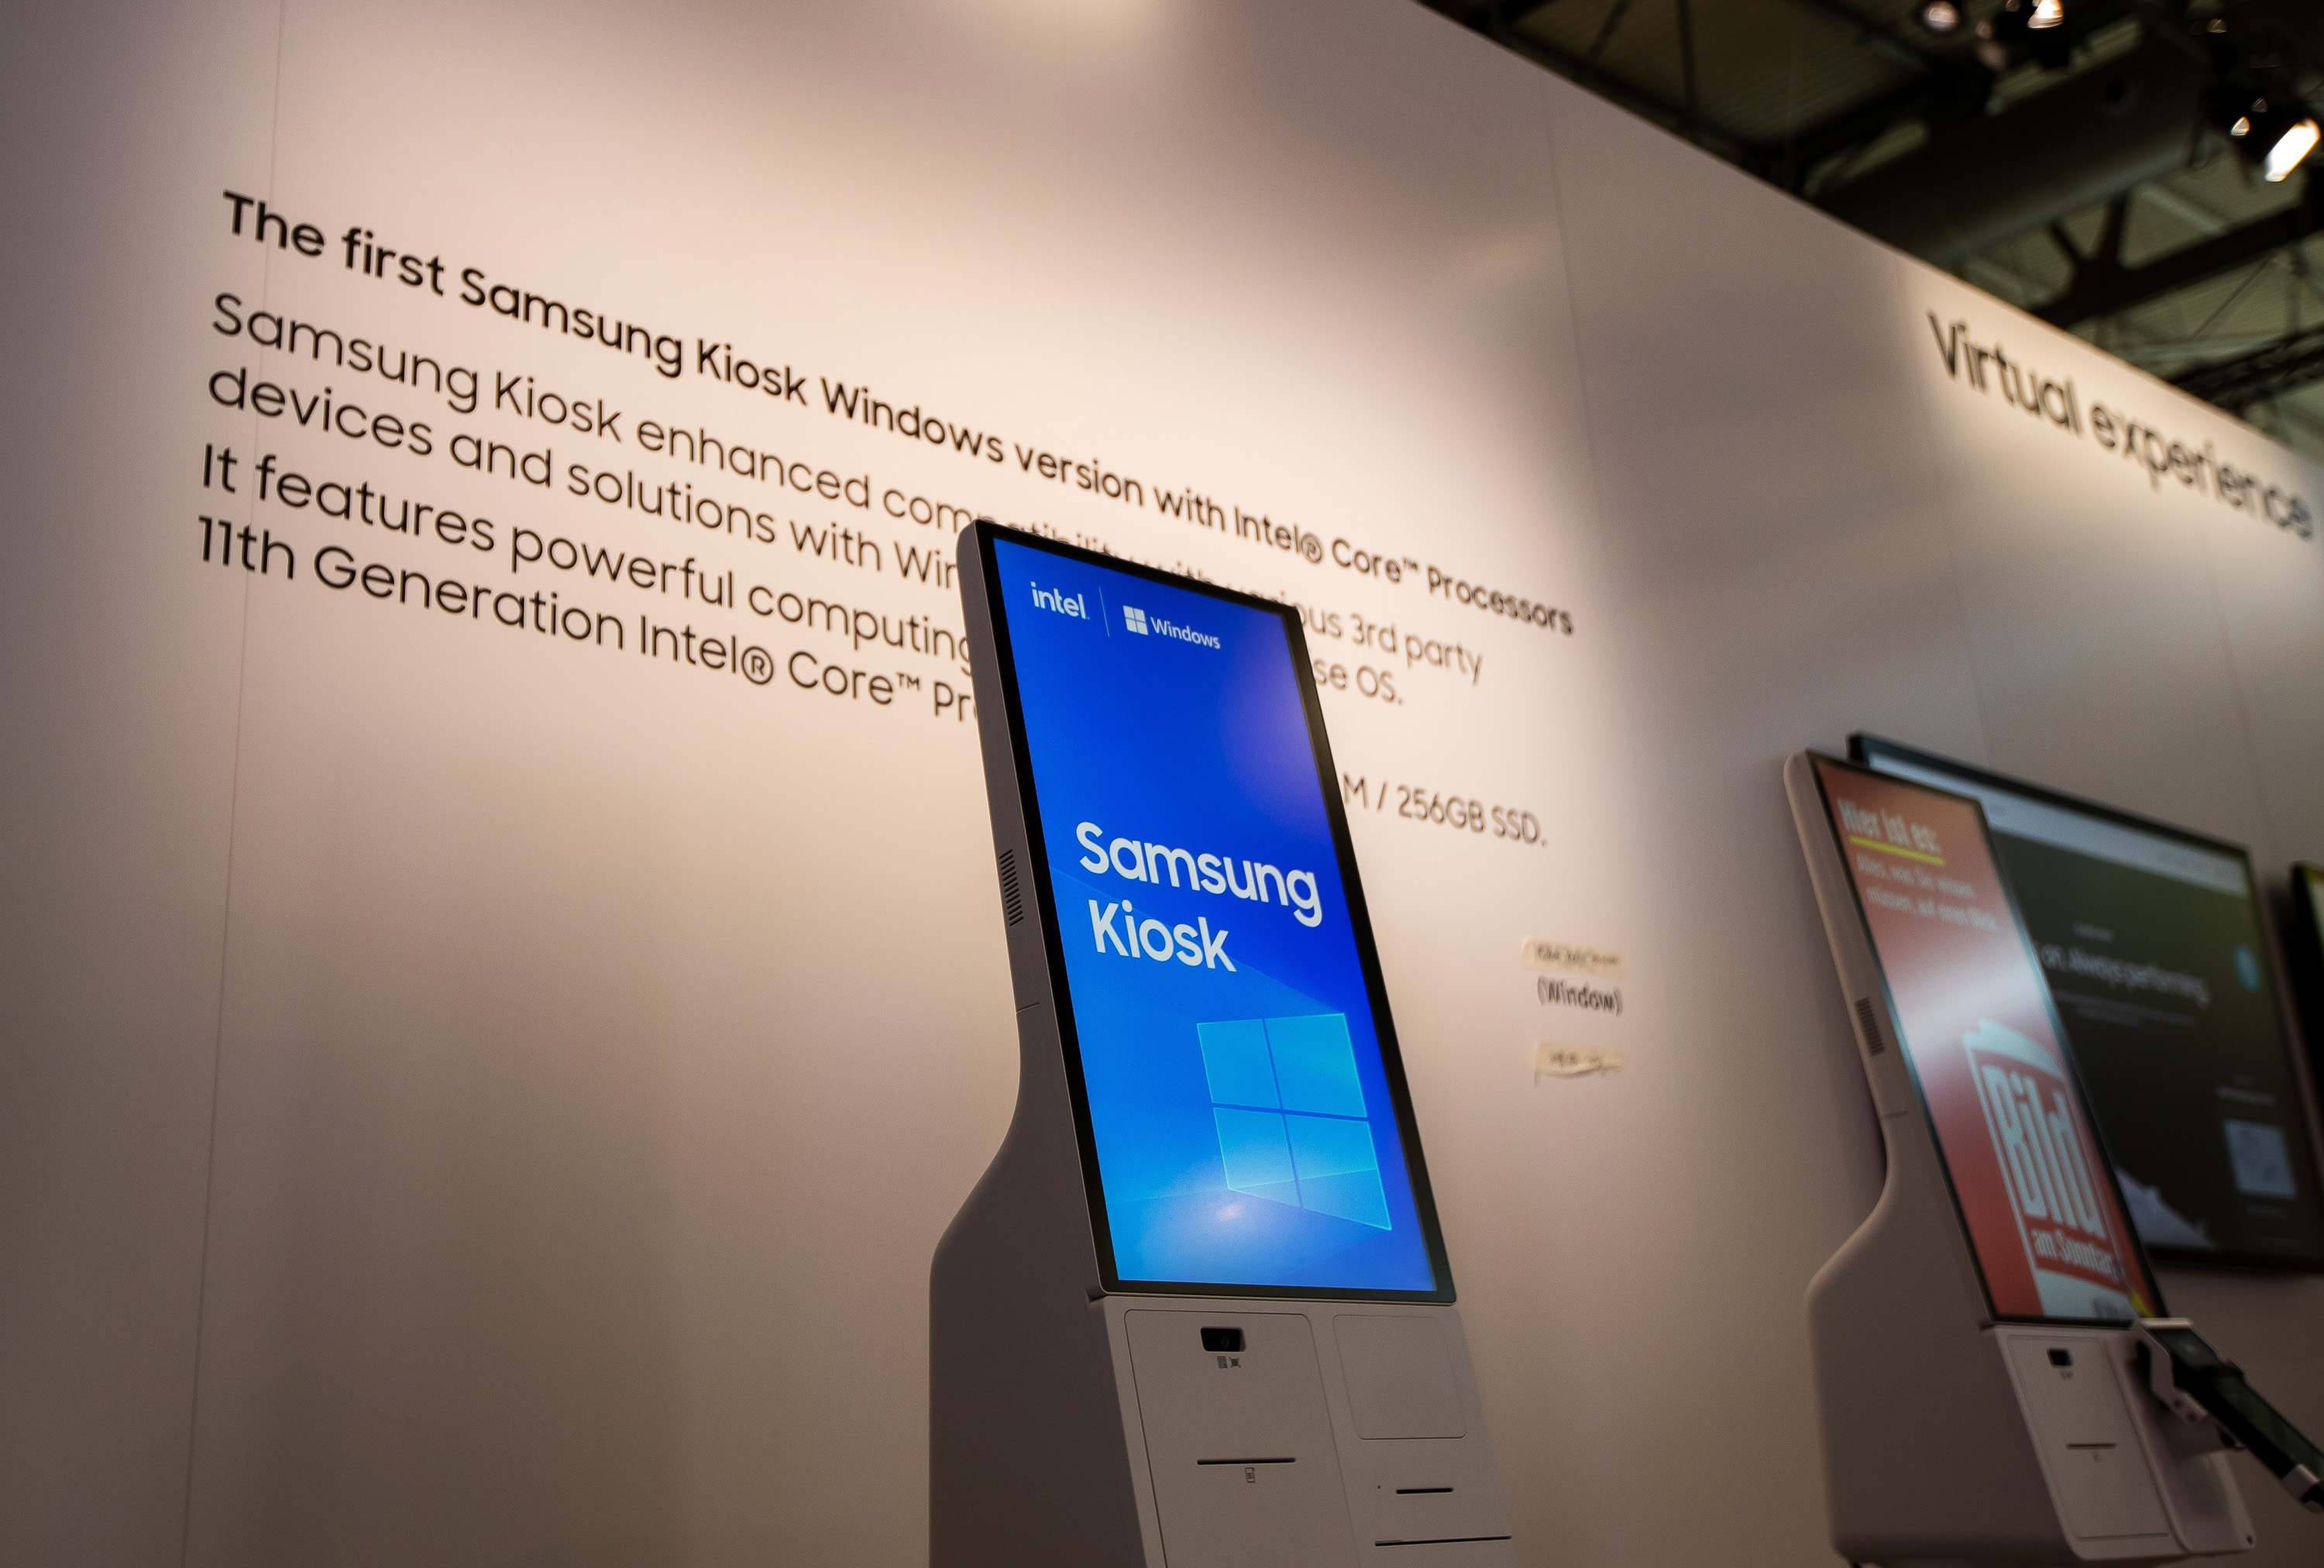 dl8 ISE Samsung Kiosk with Window version